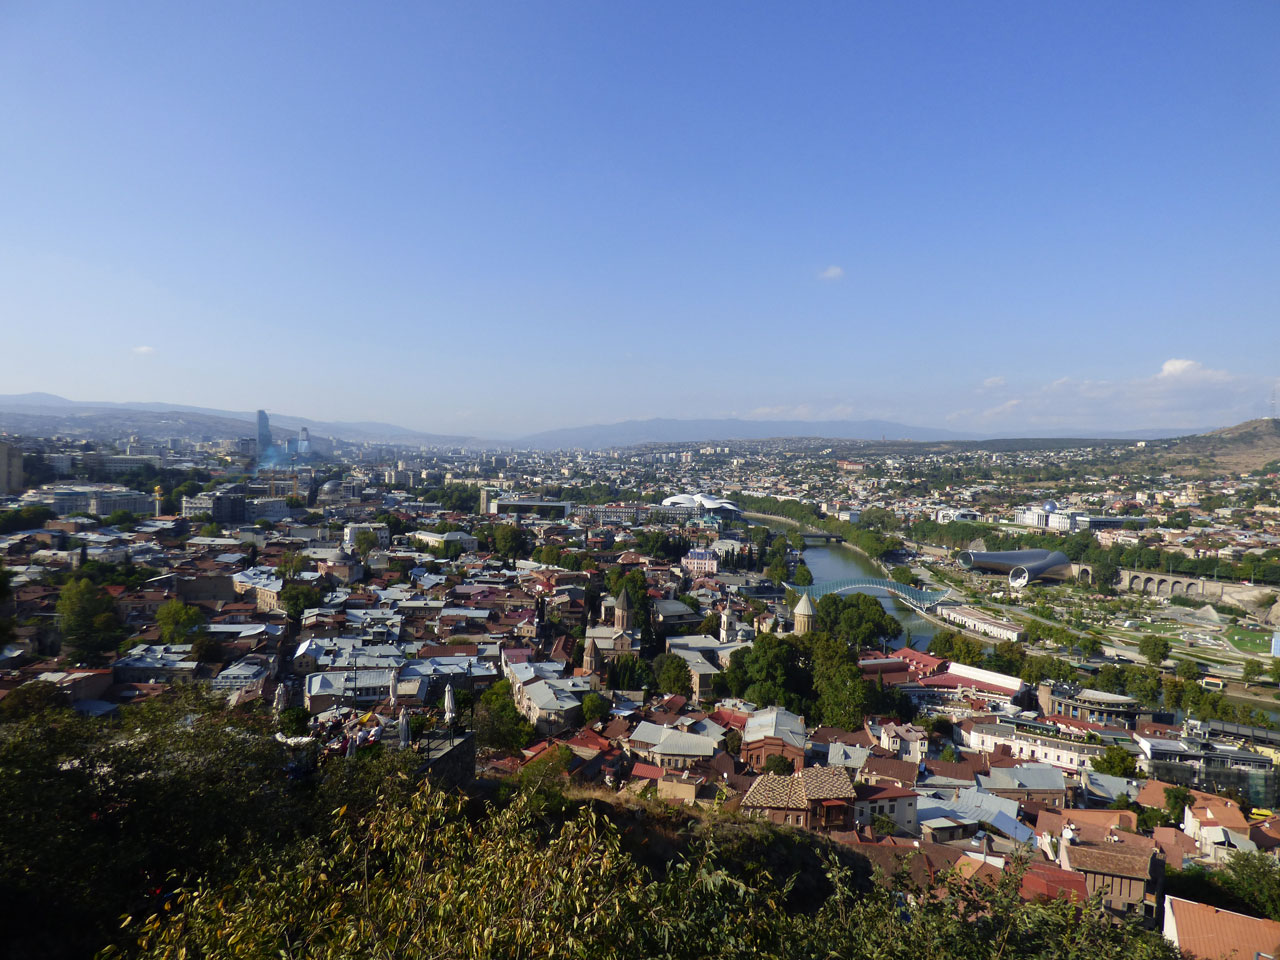 View of Tbilisi from Narikala Fortress